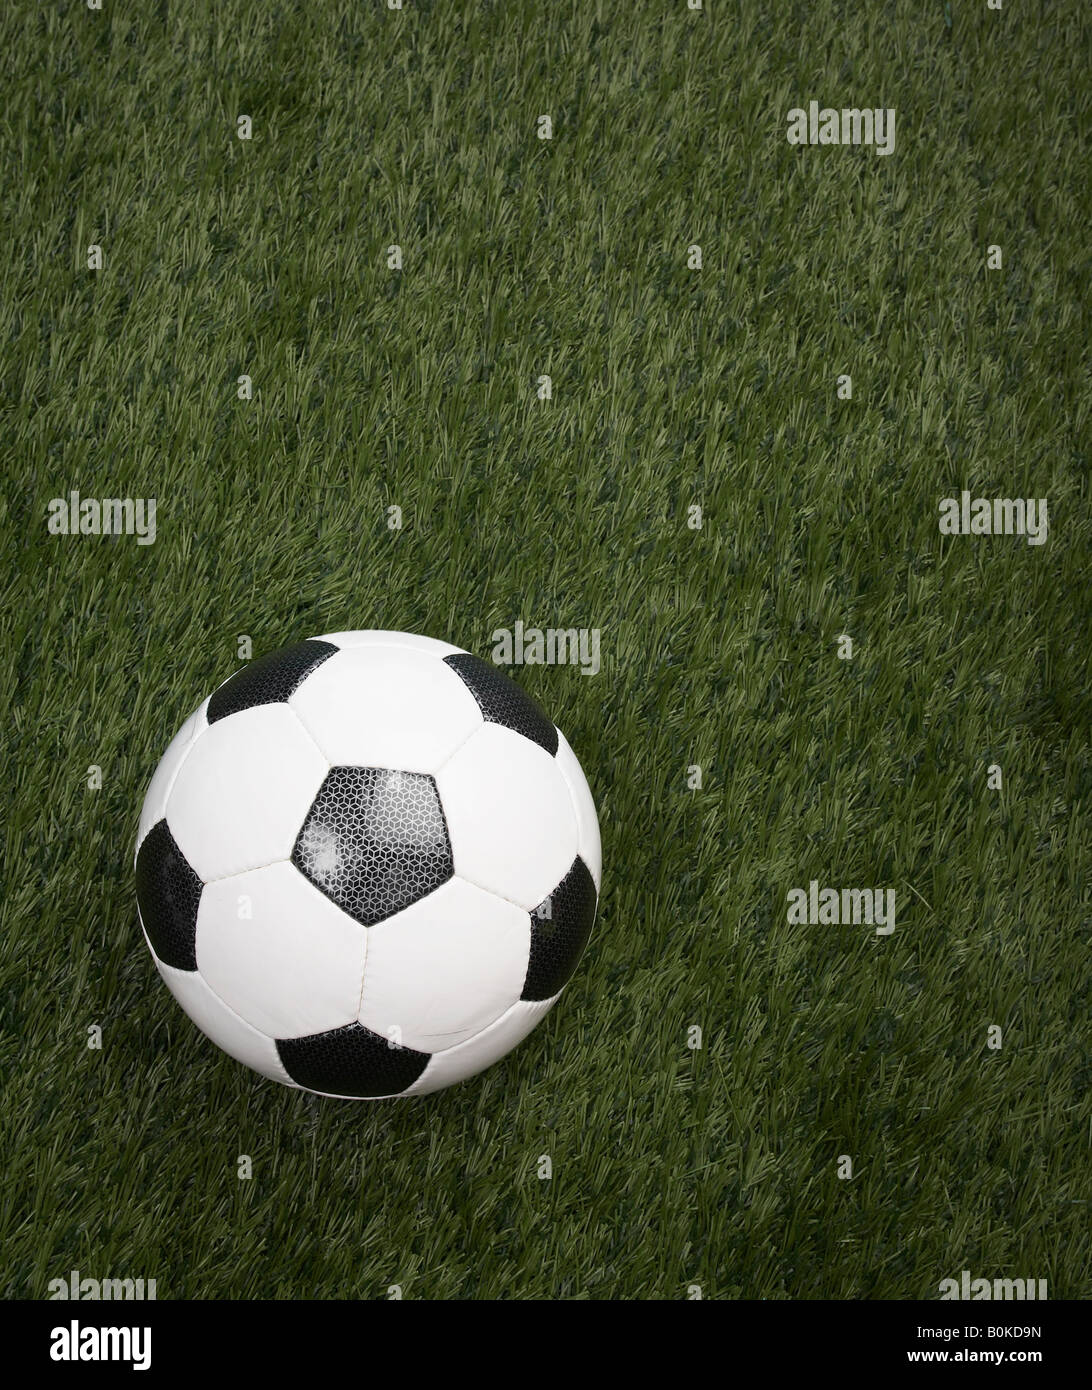 Soccer Ball on Grass Banque D'Images